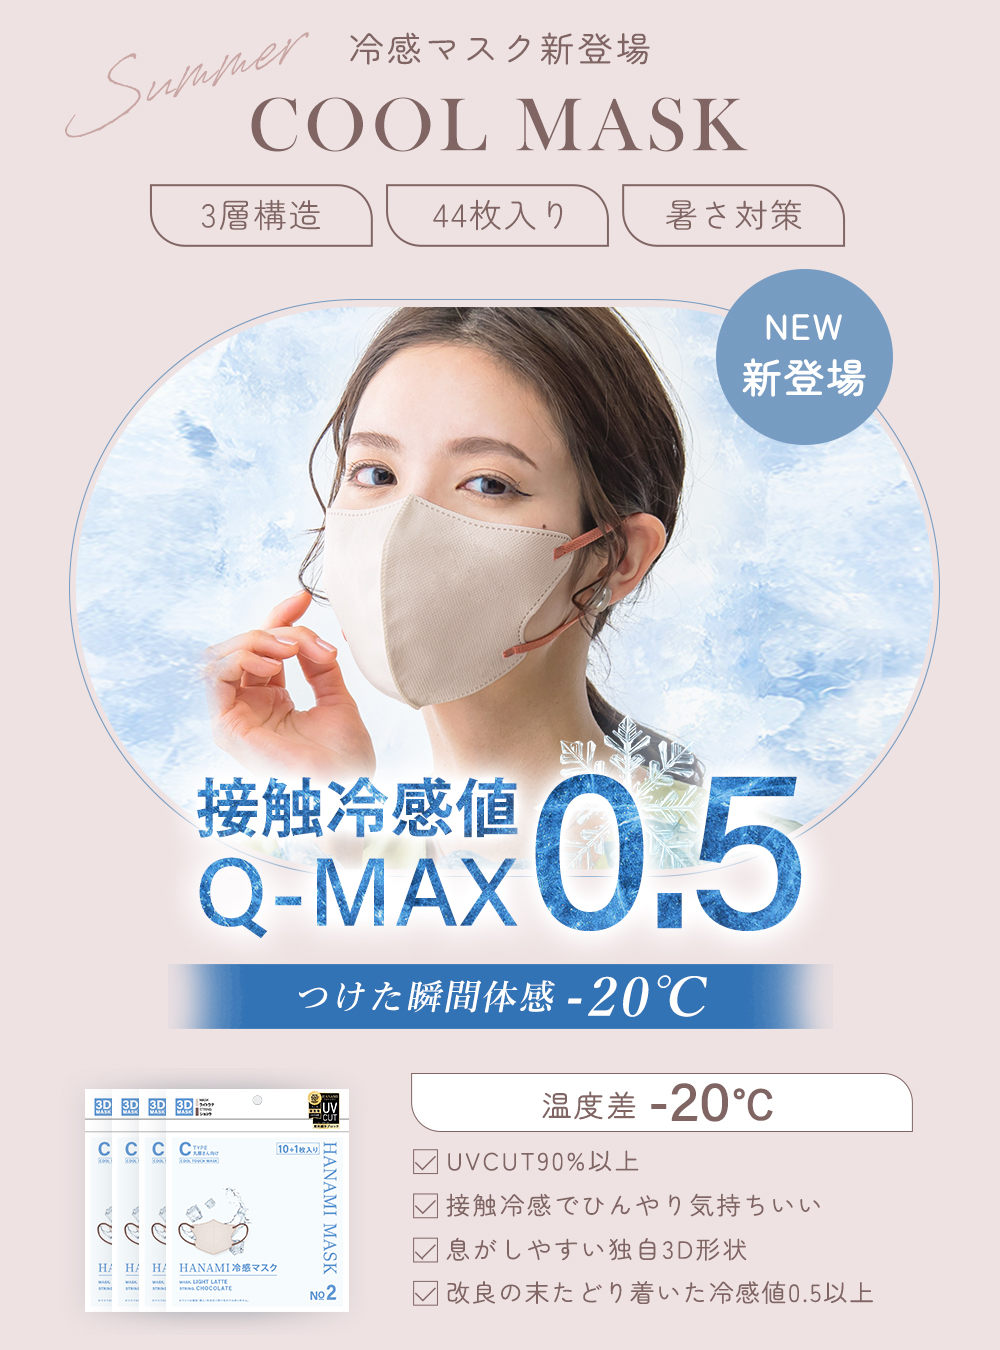 [ coupon use . the cheapest 258 jpy ] mask solid non-woven mask cold sensation high capacity 53 sheets bai color 3D mask sensitive .. kind mask stylish non-woven mask solid mask fashion 